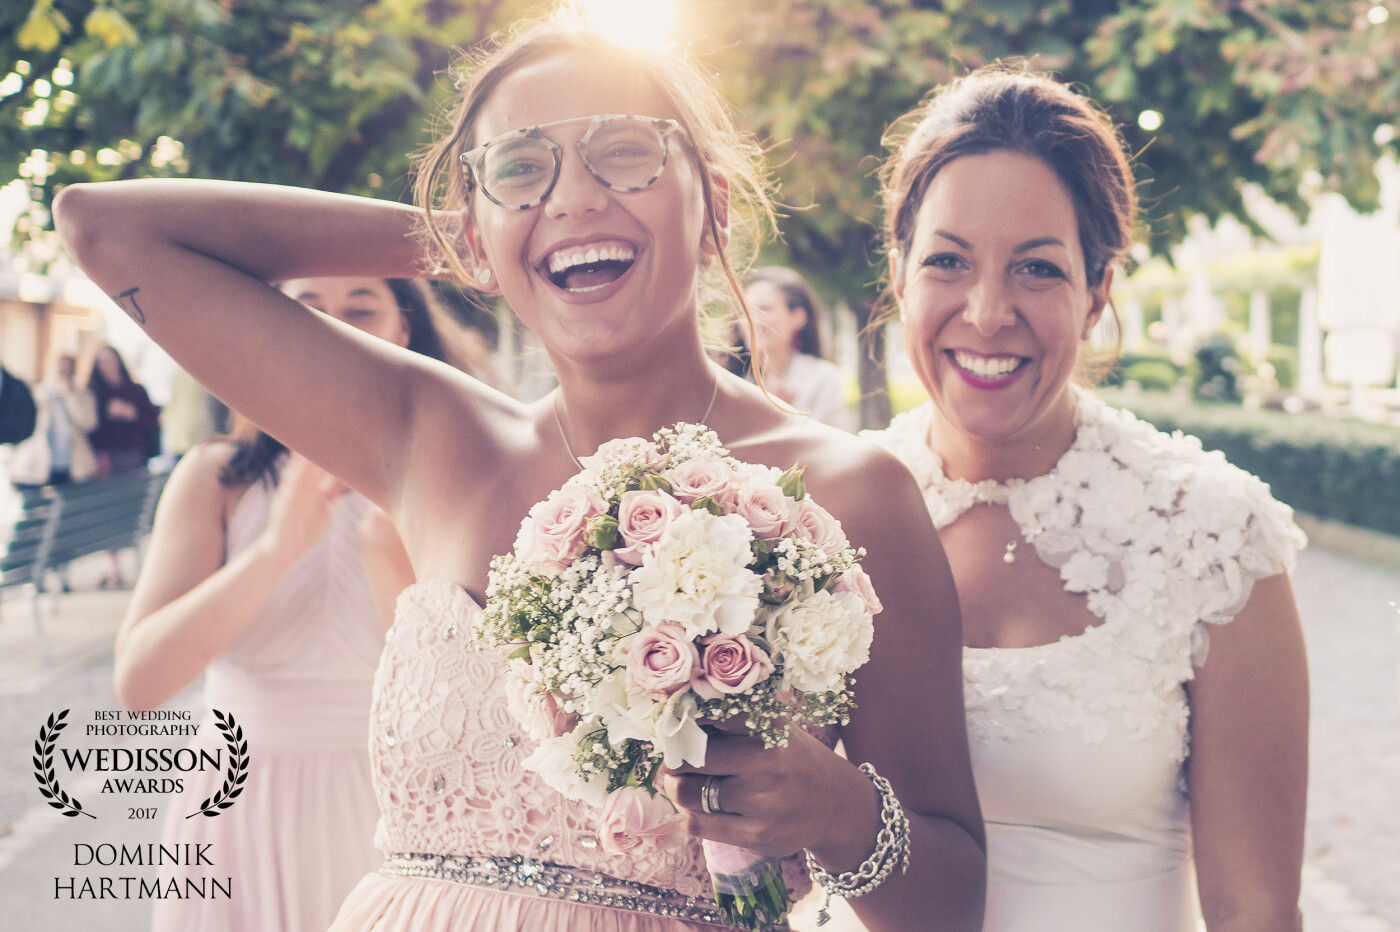 We all had so much fun on this beautiful wedding day in September 2017 - this young girl caught the wedding bouquet and was so excited about it. With the sun from behind we created this beautiful and emotional photo.